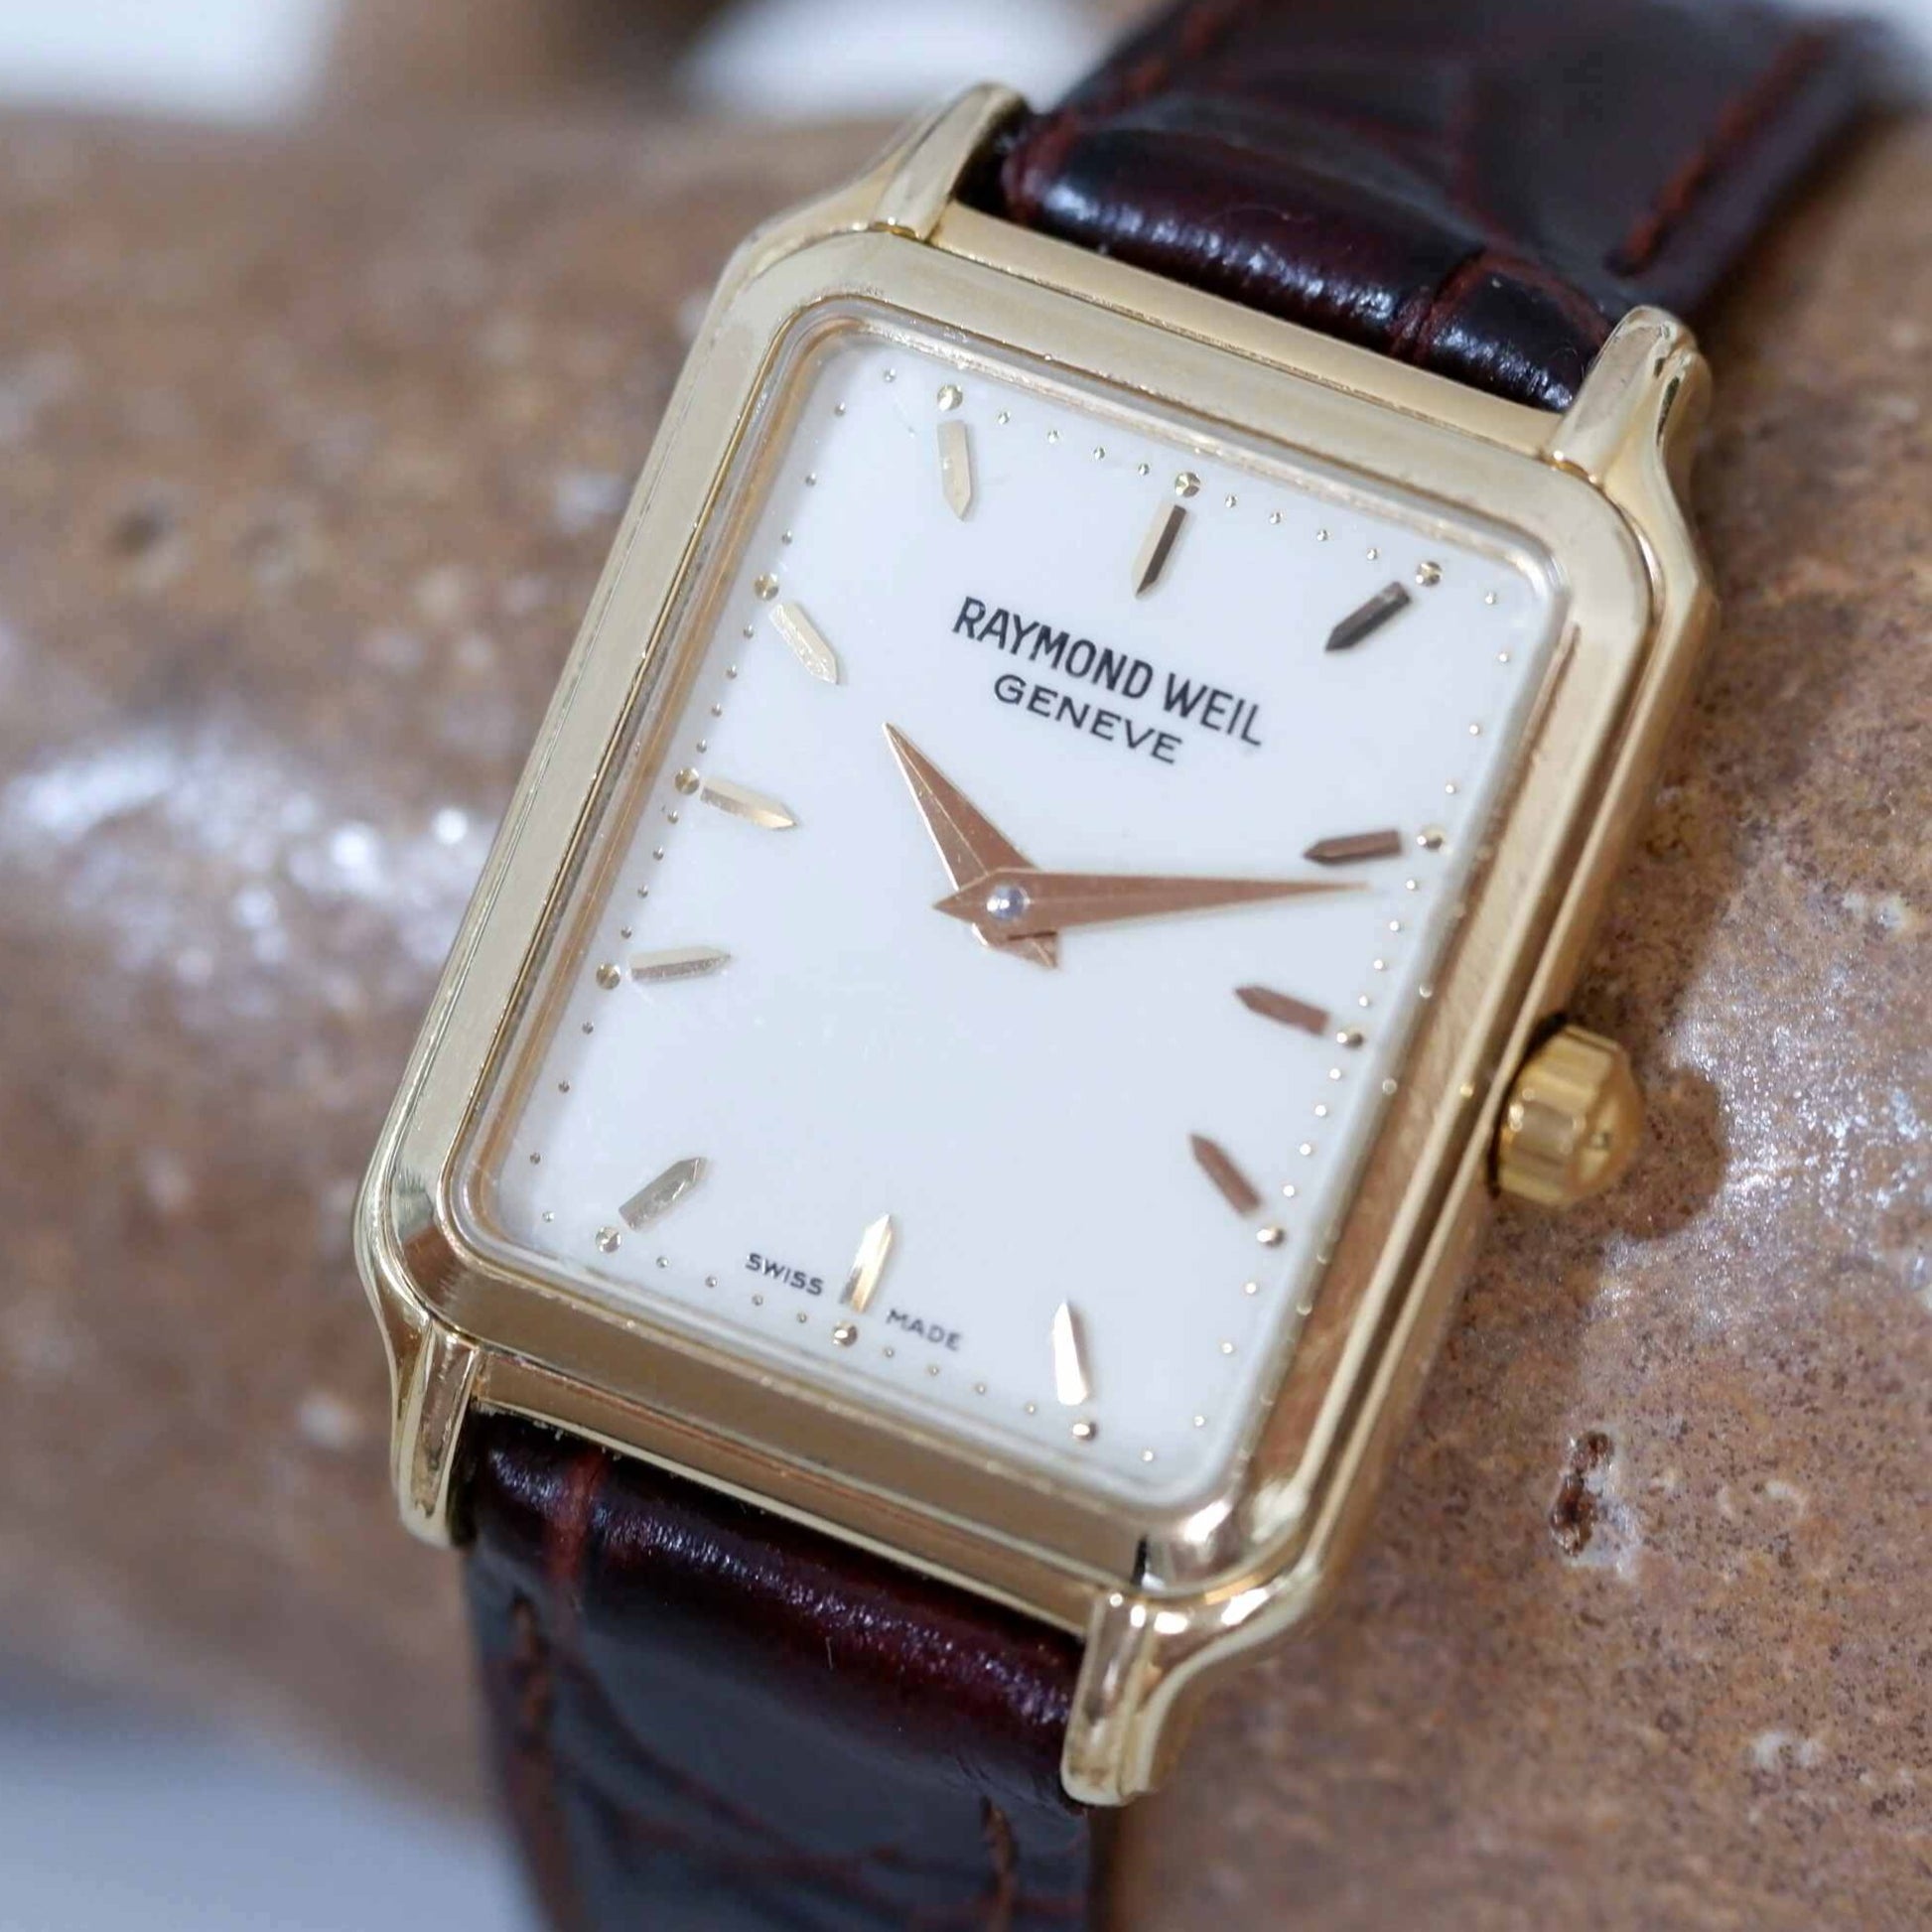 Raymond Weil Vintage Ladies Watch: 90s Golden Rectangular Style with White Dial | Slight Right Side